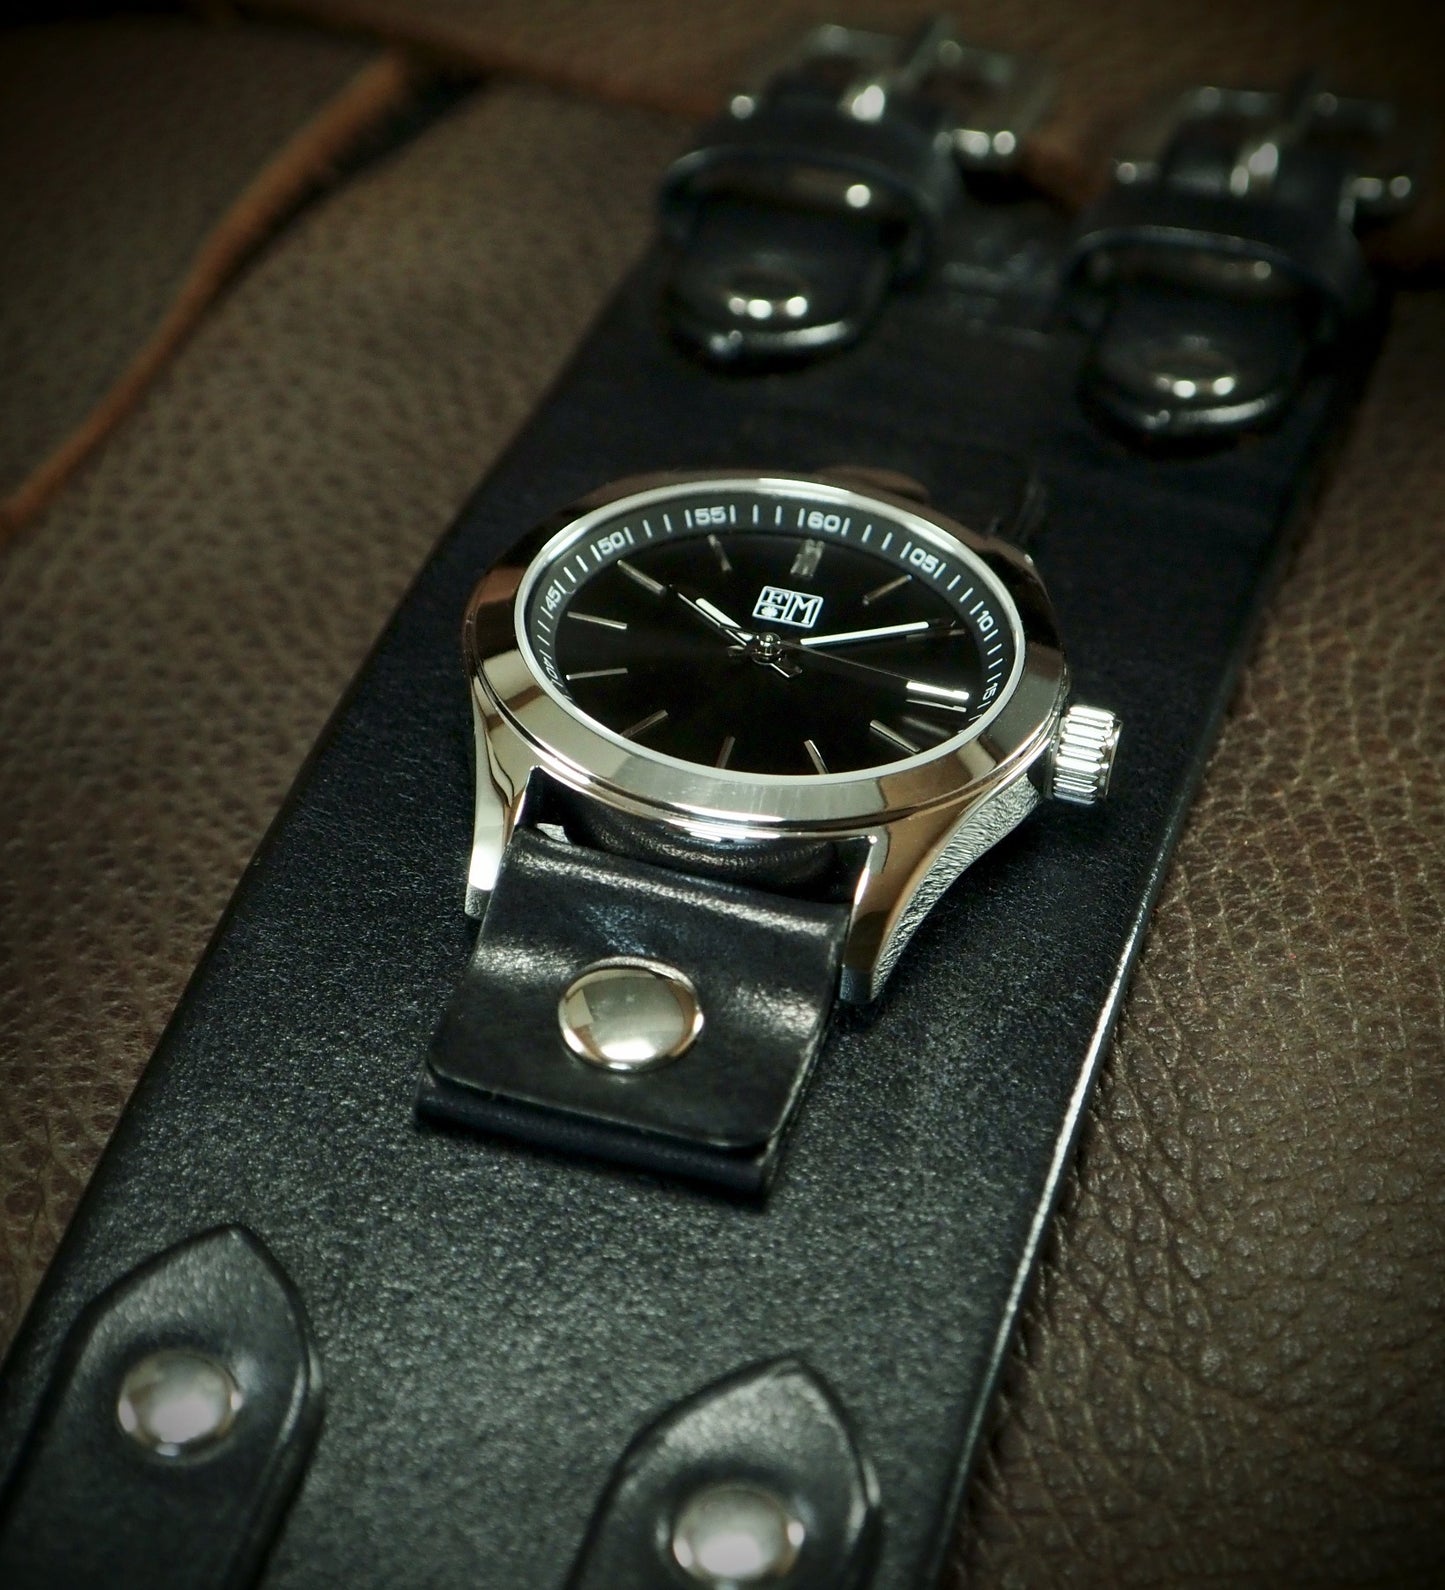 Black Leather cuff watch : Refined Retro Vintage style